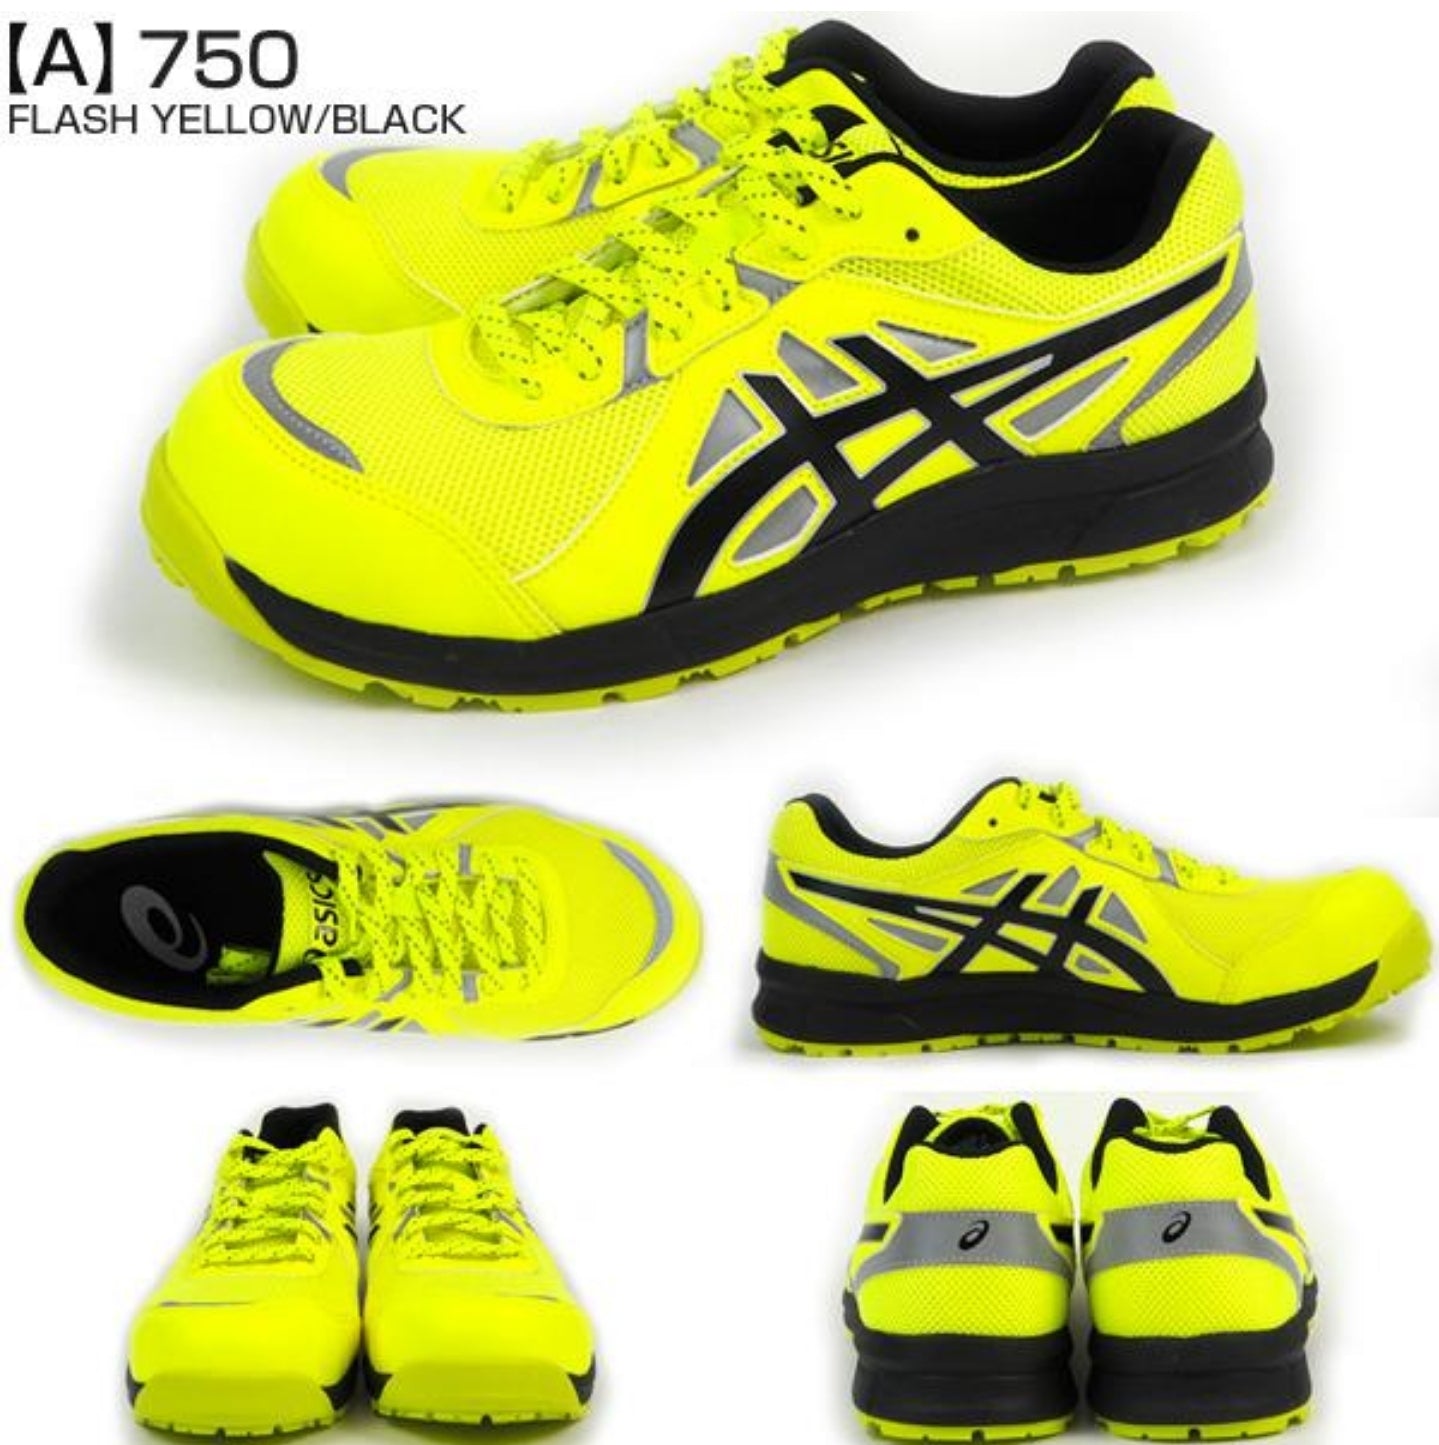 🎌Japan🎌 [In stock▪️Ready to ship] ASICS Night Work Fluorescent Yellow EU43.5 27cm US9.5 Safety Shoes JSAA Class A Anti-Slip Boots CP206 JIS CP